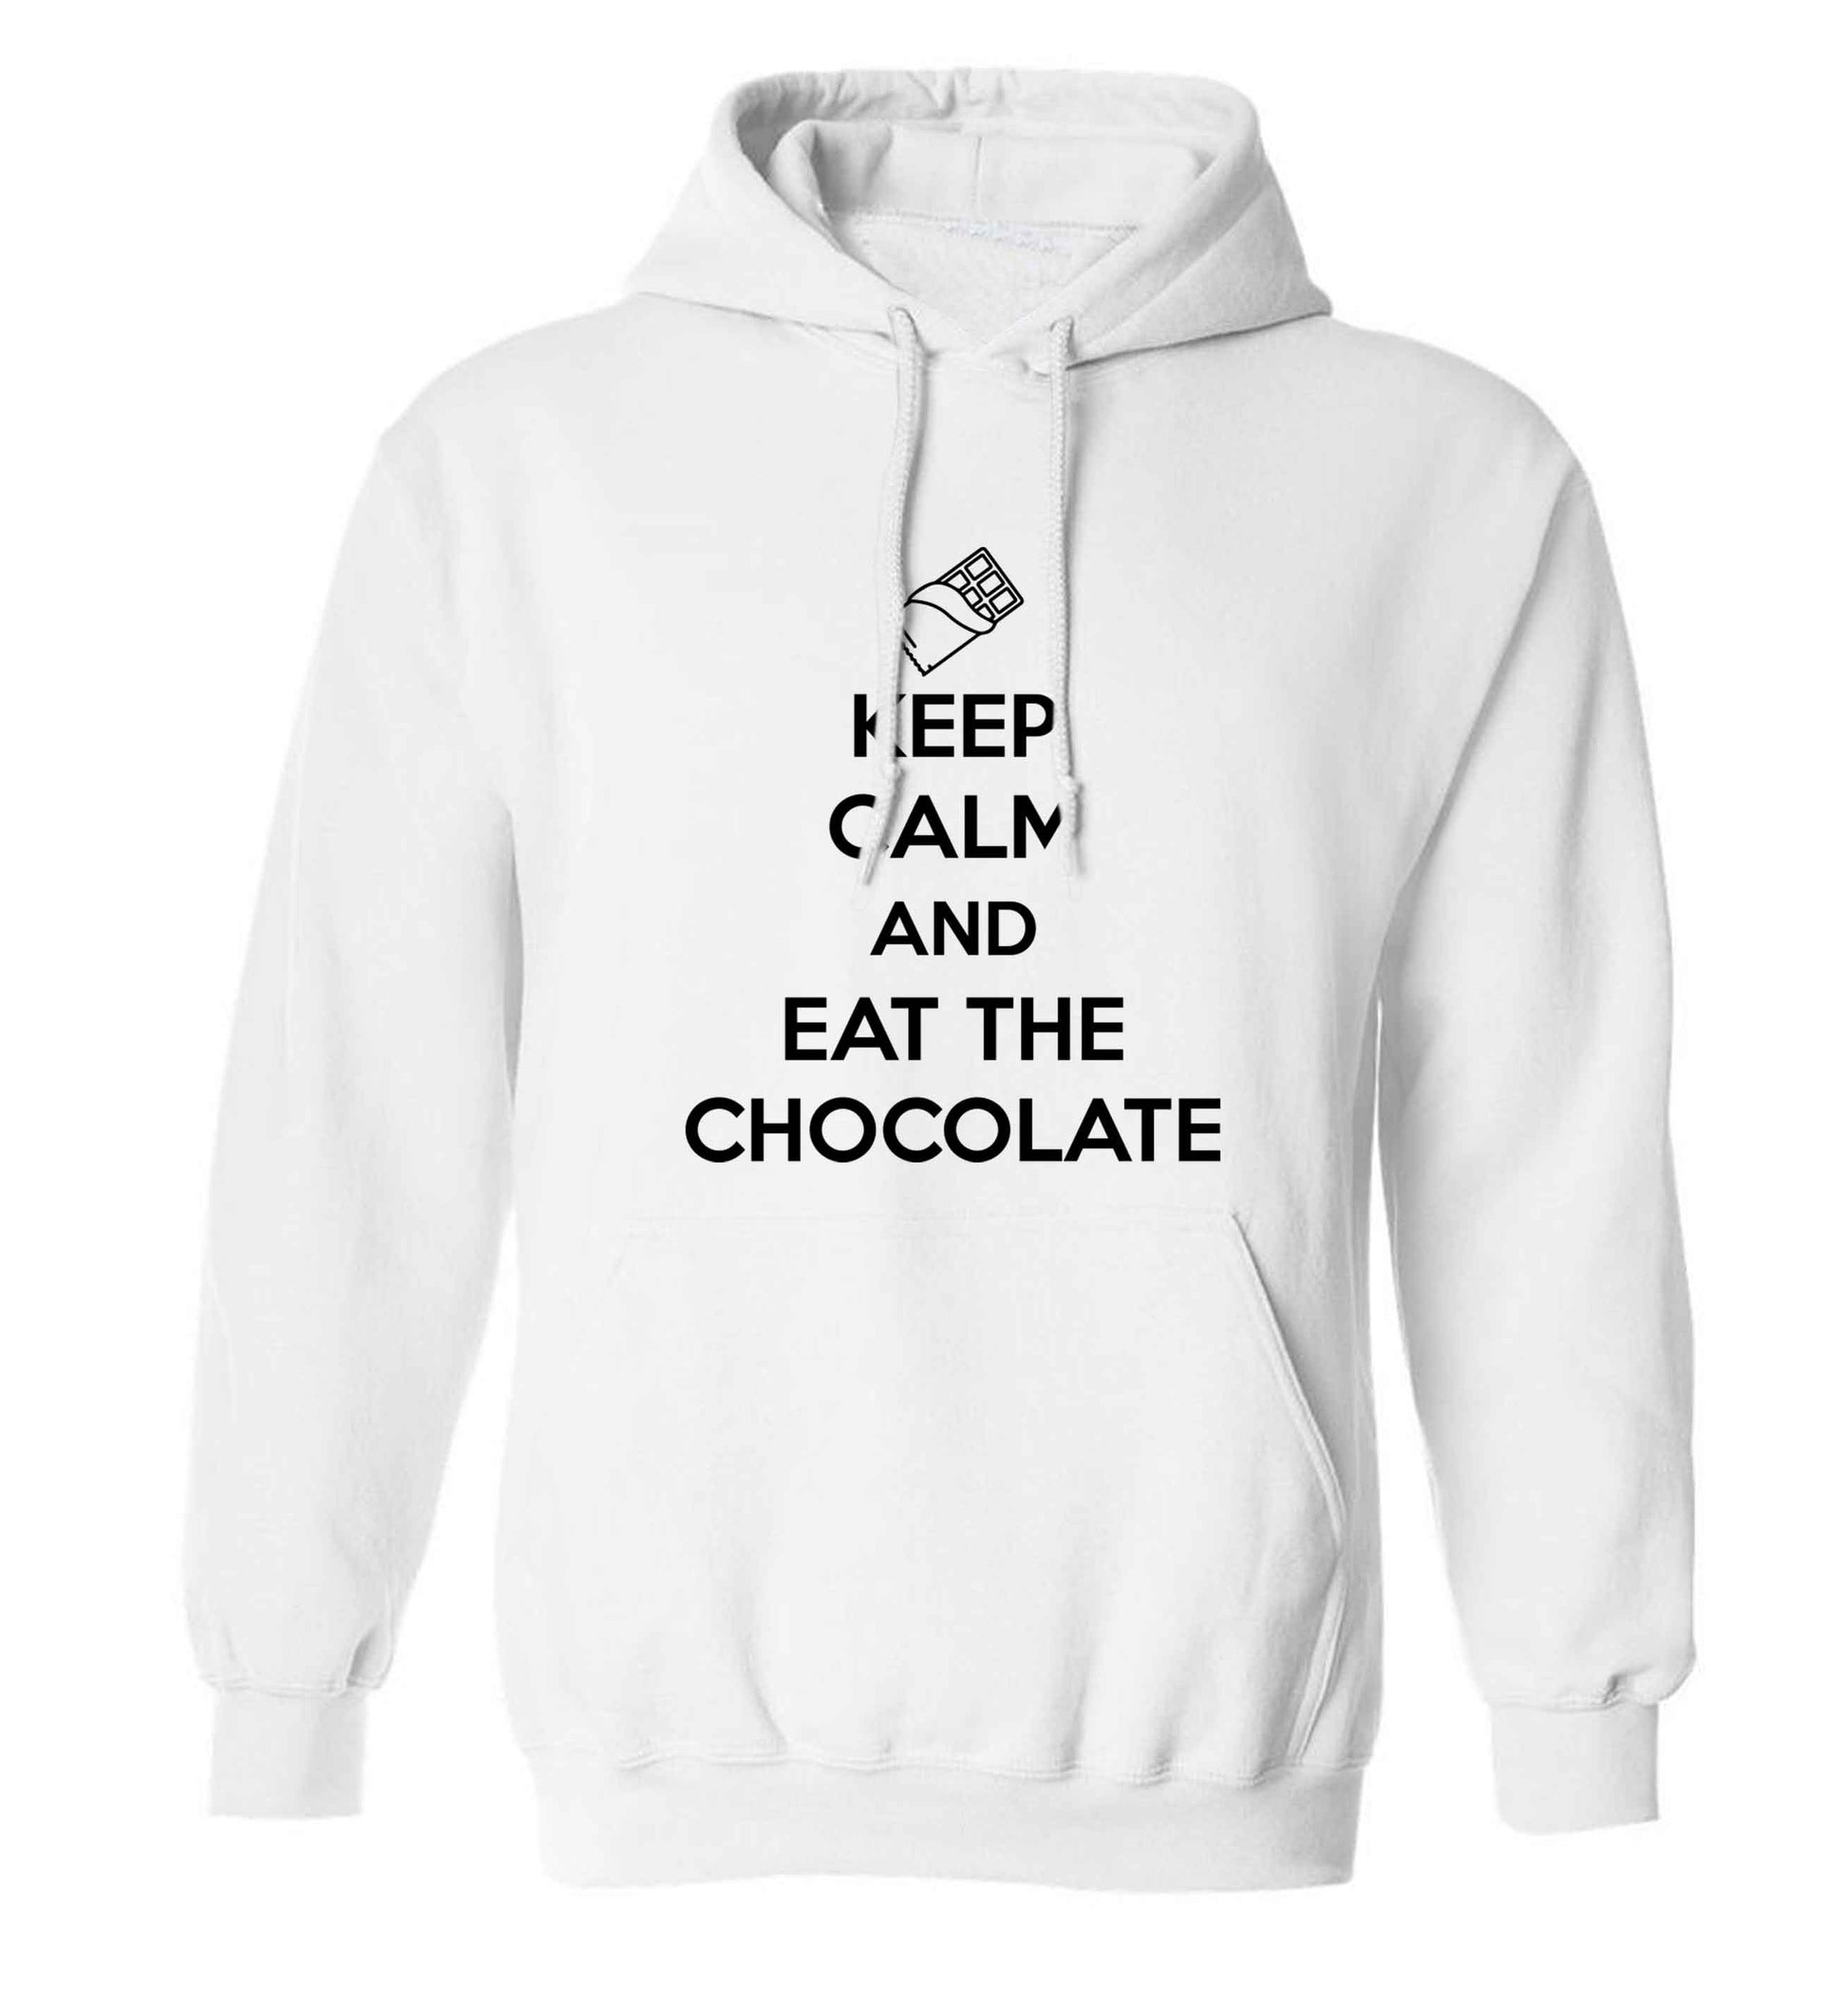 funny gift for a chocaholic! Keep calm and eat the chocolate adults unisex white hoodie 2XL